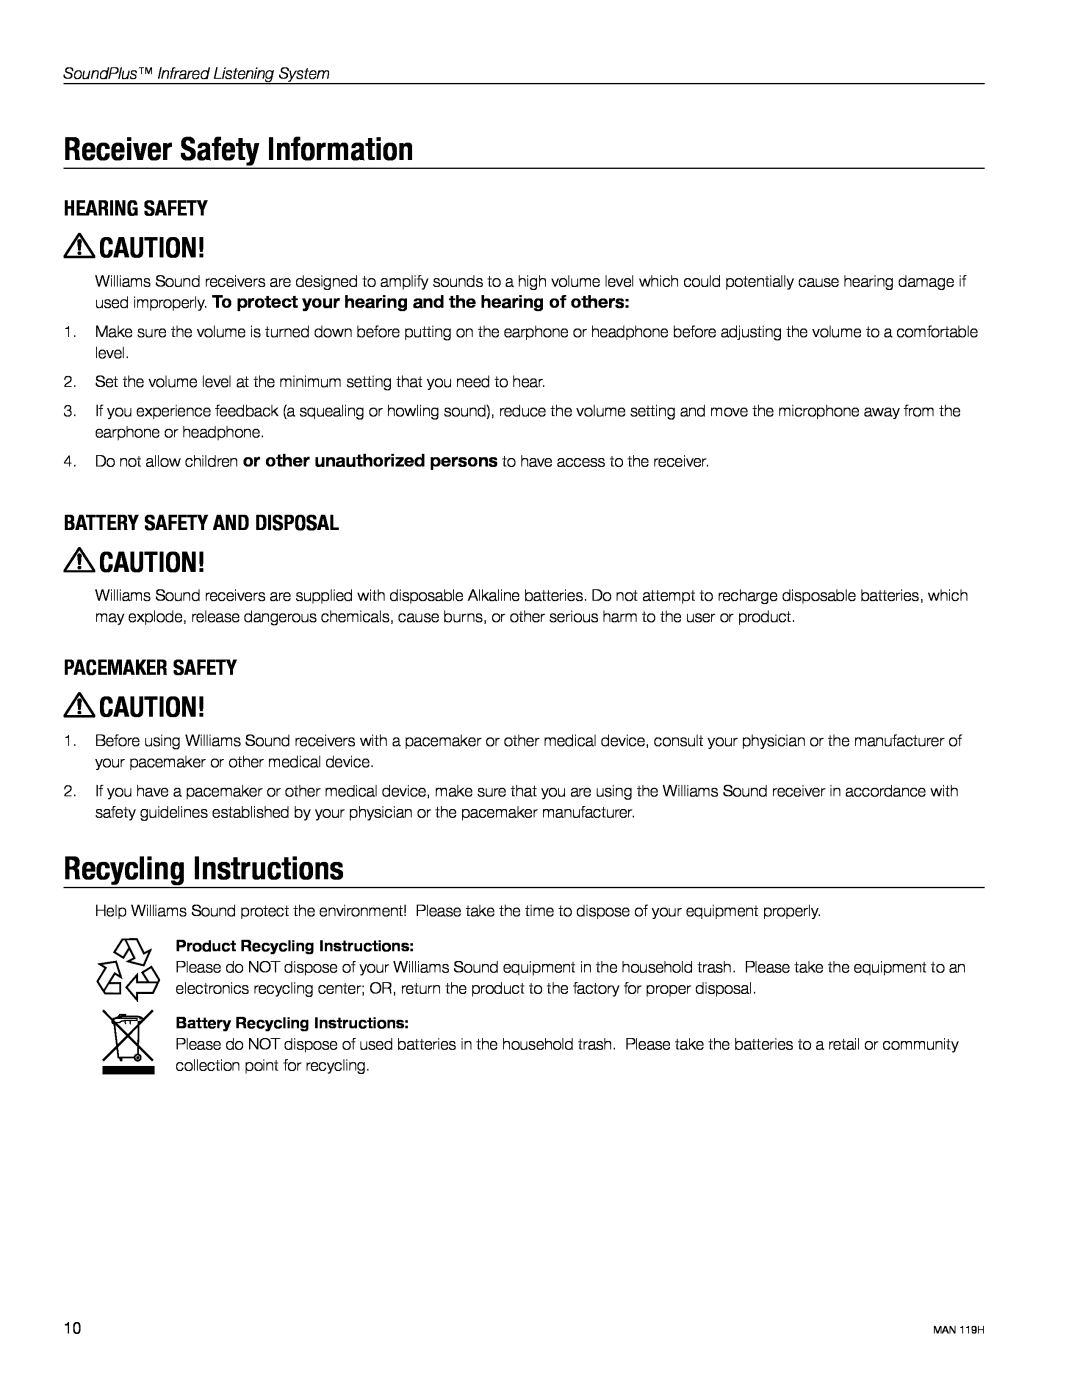 Williams Sound WIRRX22-4 Receiver Safety Information, Recycling Instructions, Hearing Safety, Battery Safety And Disposal 